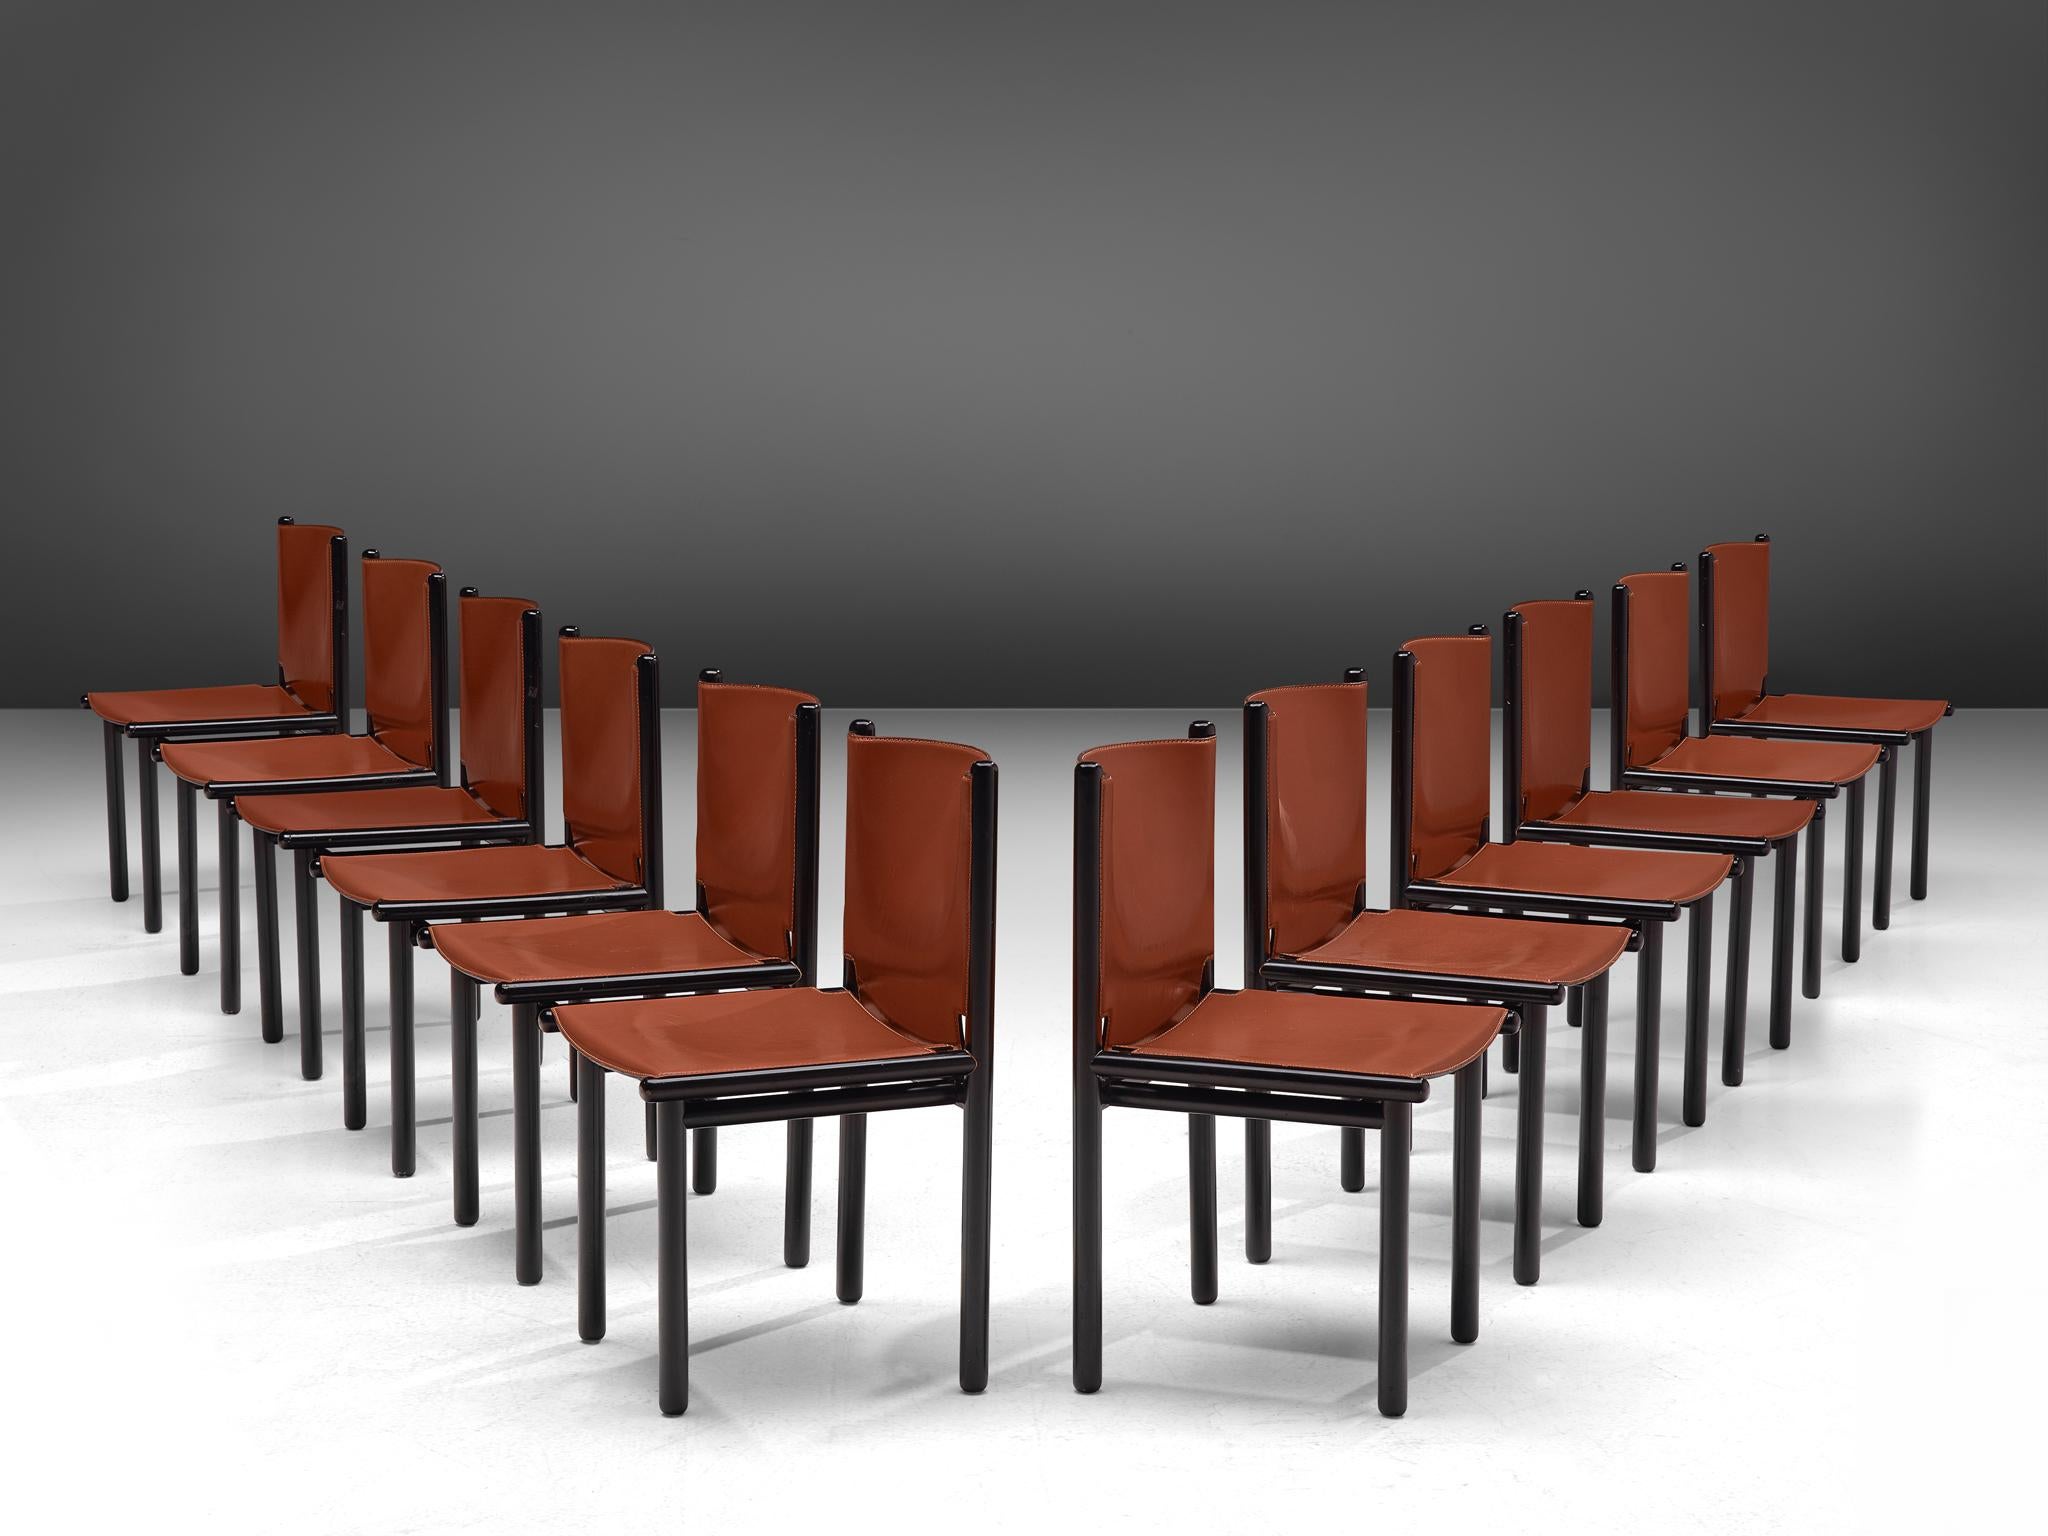 Gianfranco Frattini for Cassina, set of 12 'Caprile' dining chairs, Italy, 1985

Stunning set of twelve 'Caprile' dining chairs designed by Gianfranco Frattini for Cassina in 1985. The chairs feature a strong structure with leather seats. The